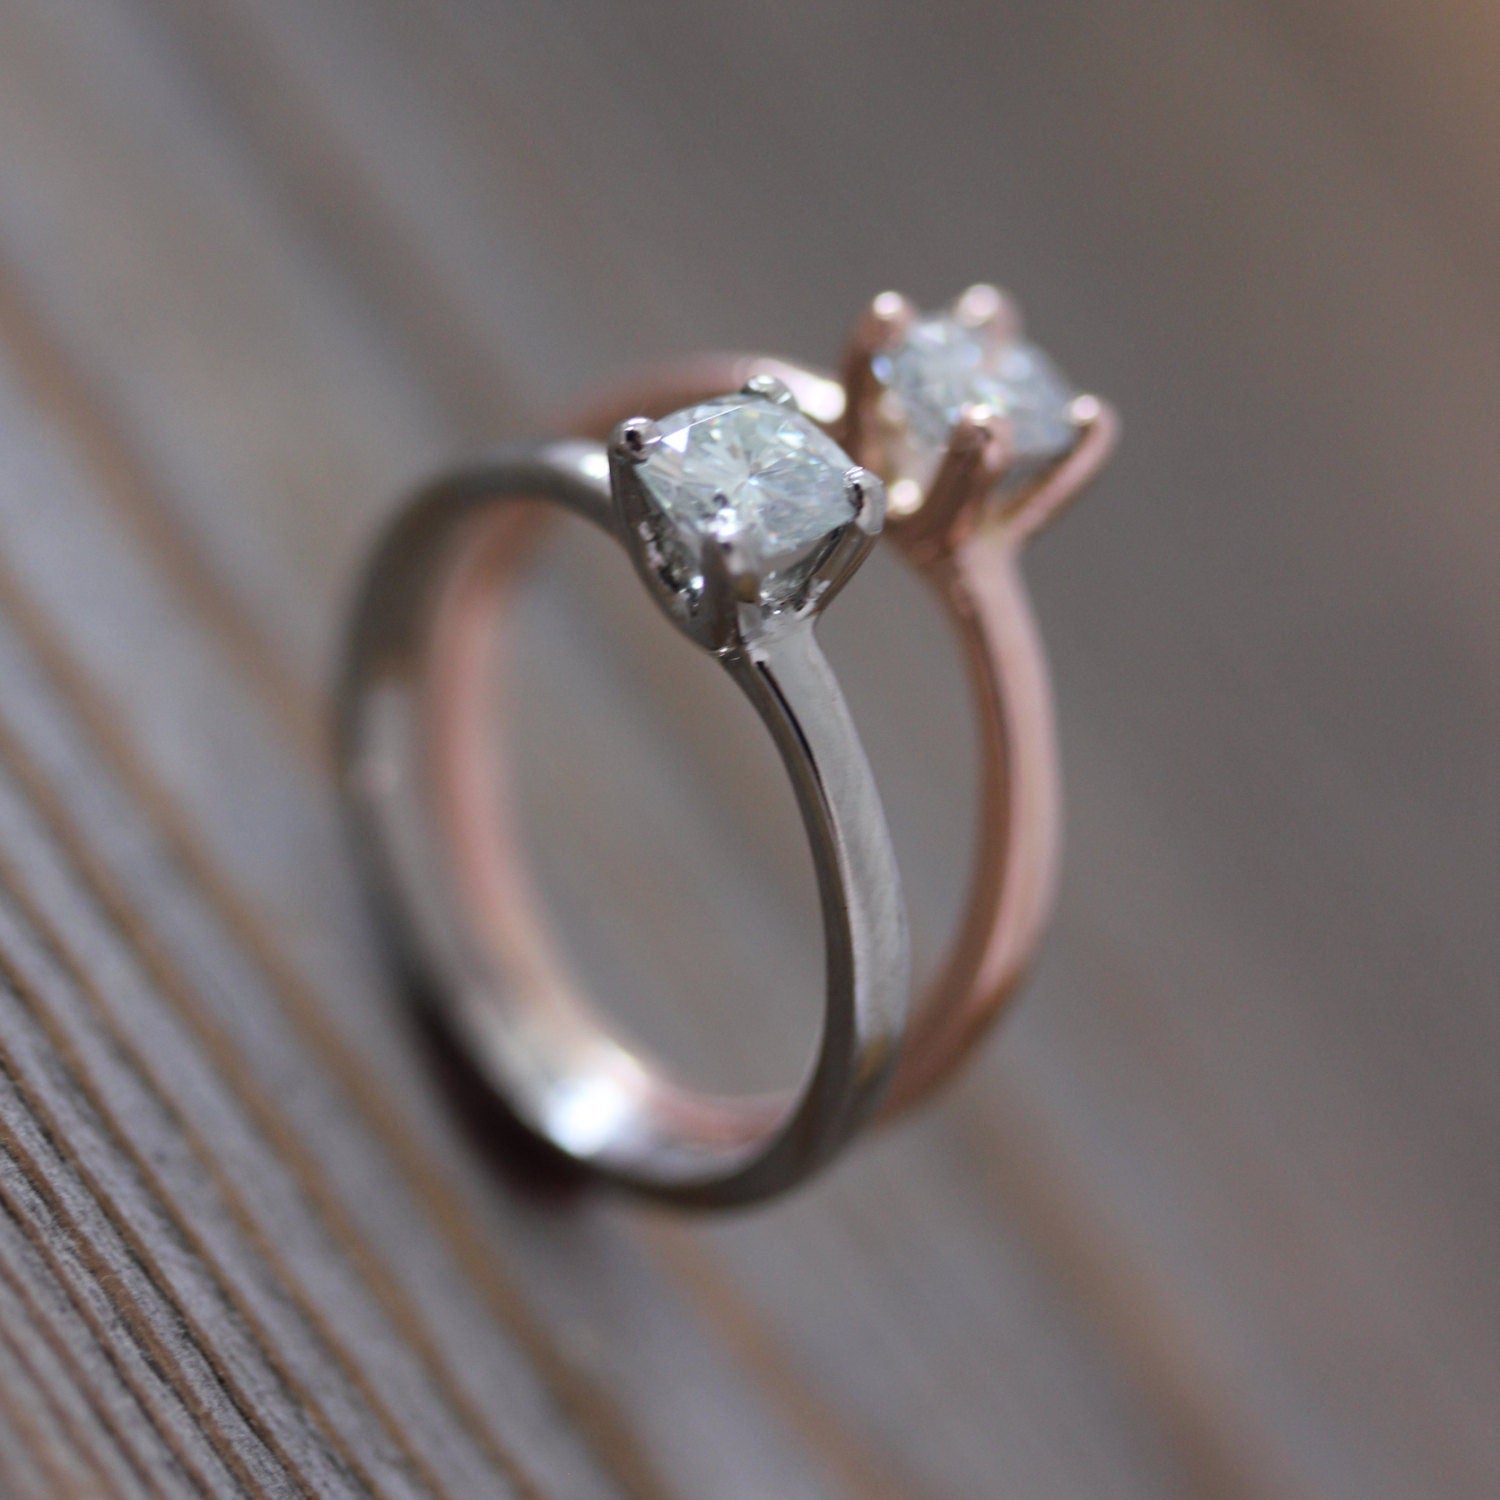 Two Handmade Rose Gold Engagement Rings on a Wooden Table